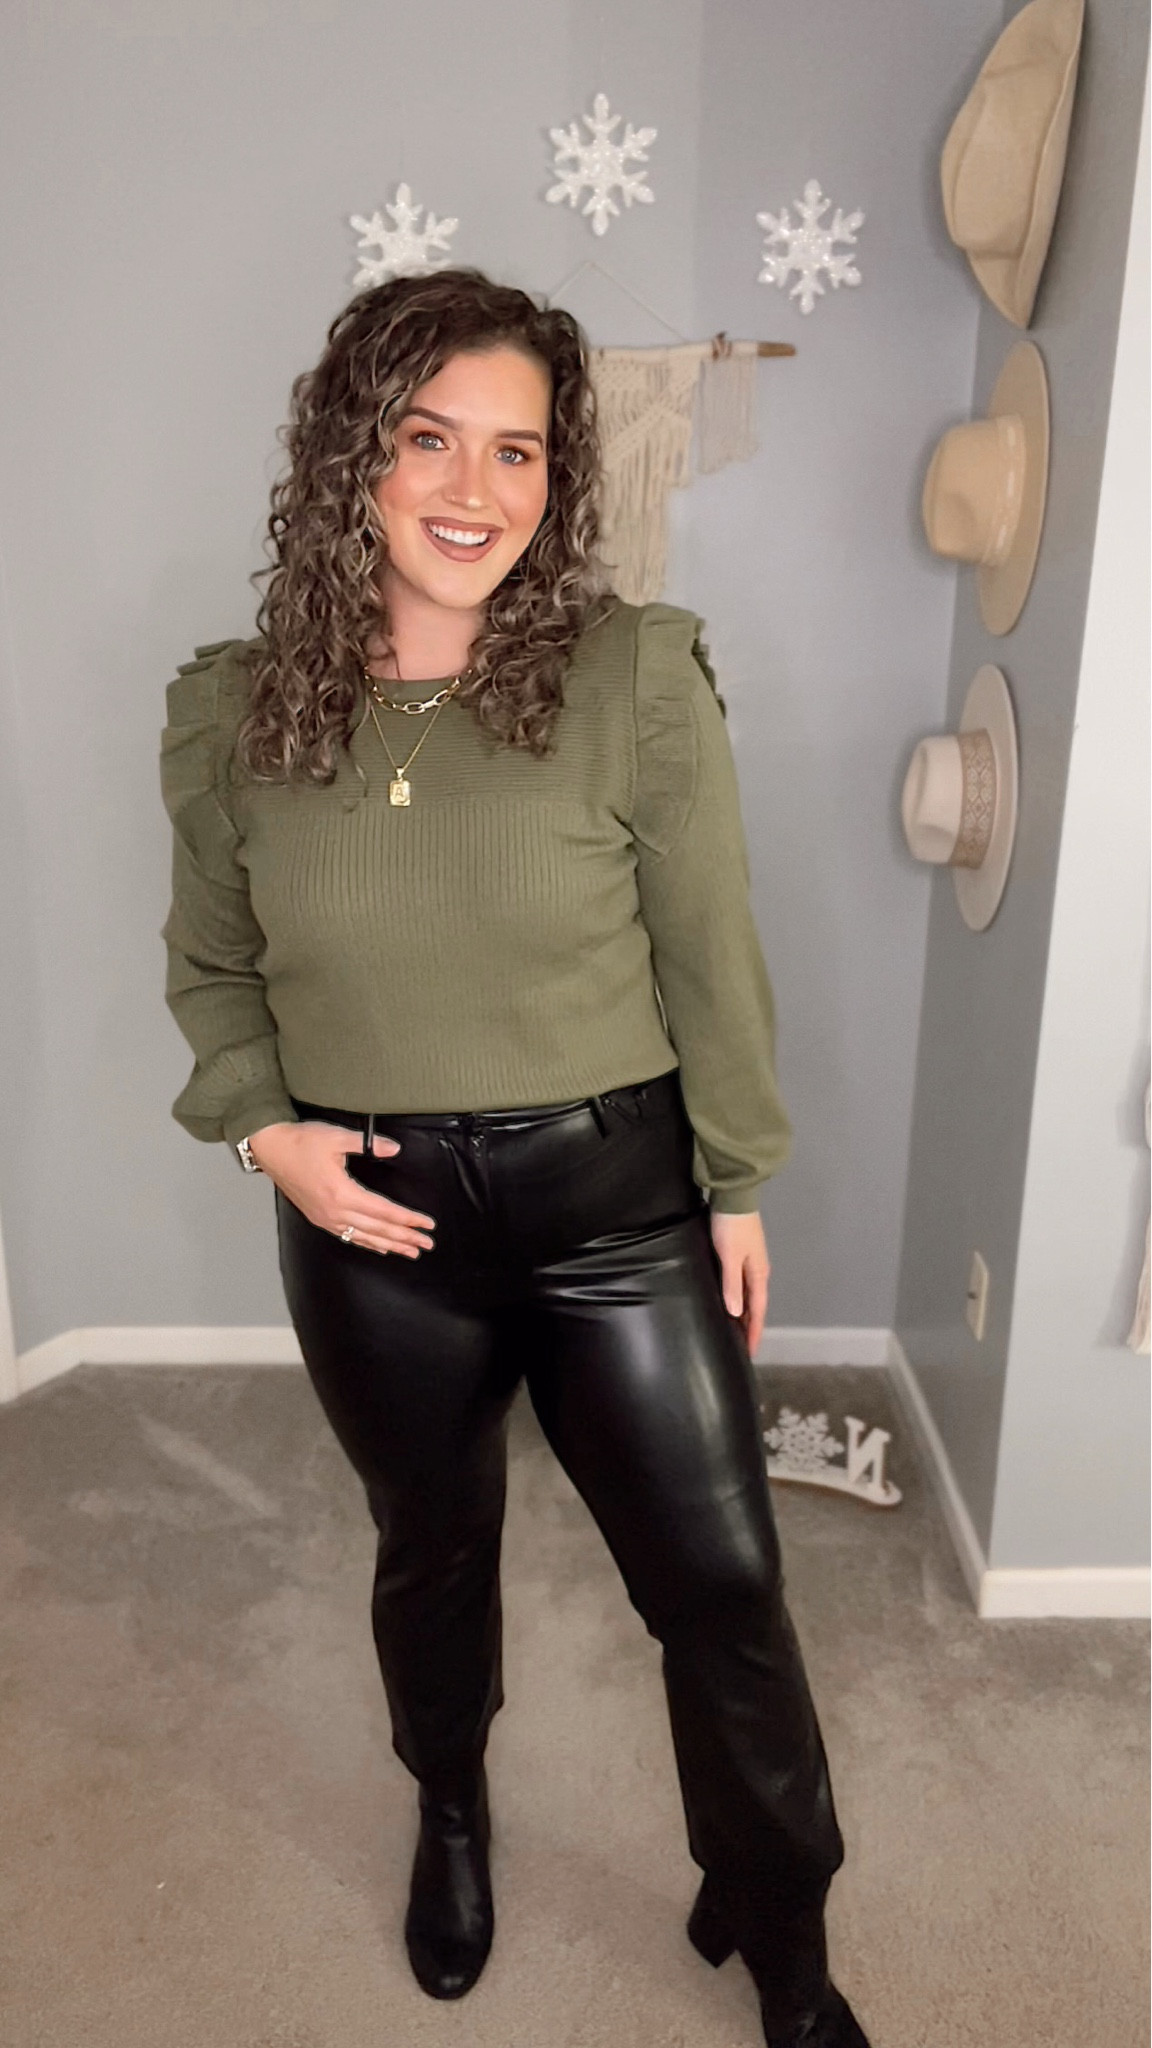 COMMAND CROPPED PANT  Leather pants style, Leather pants outfit, Cropped  pants outfit